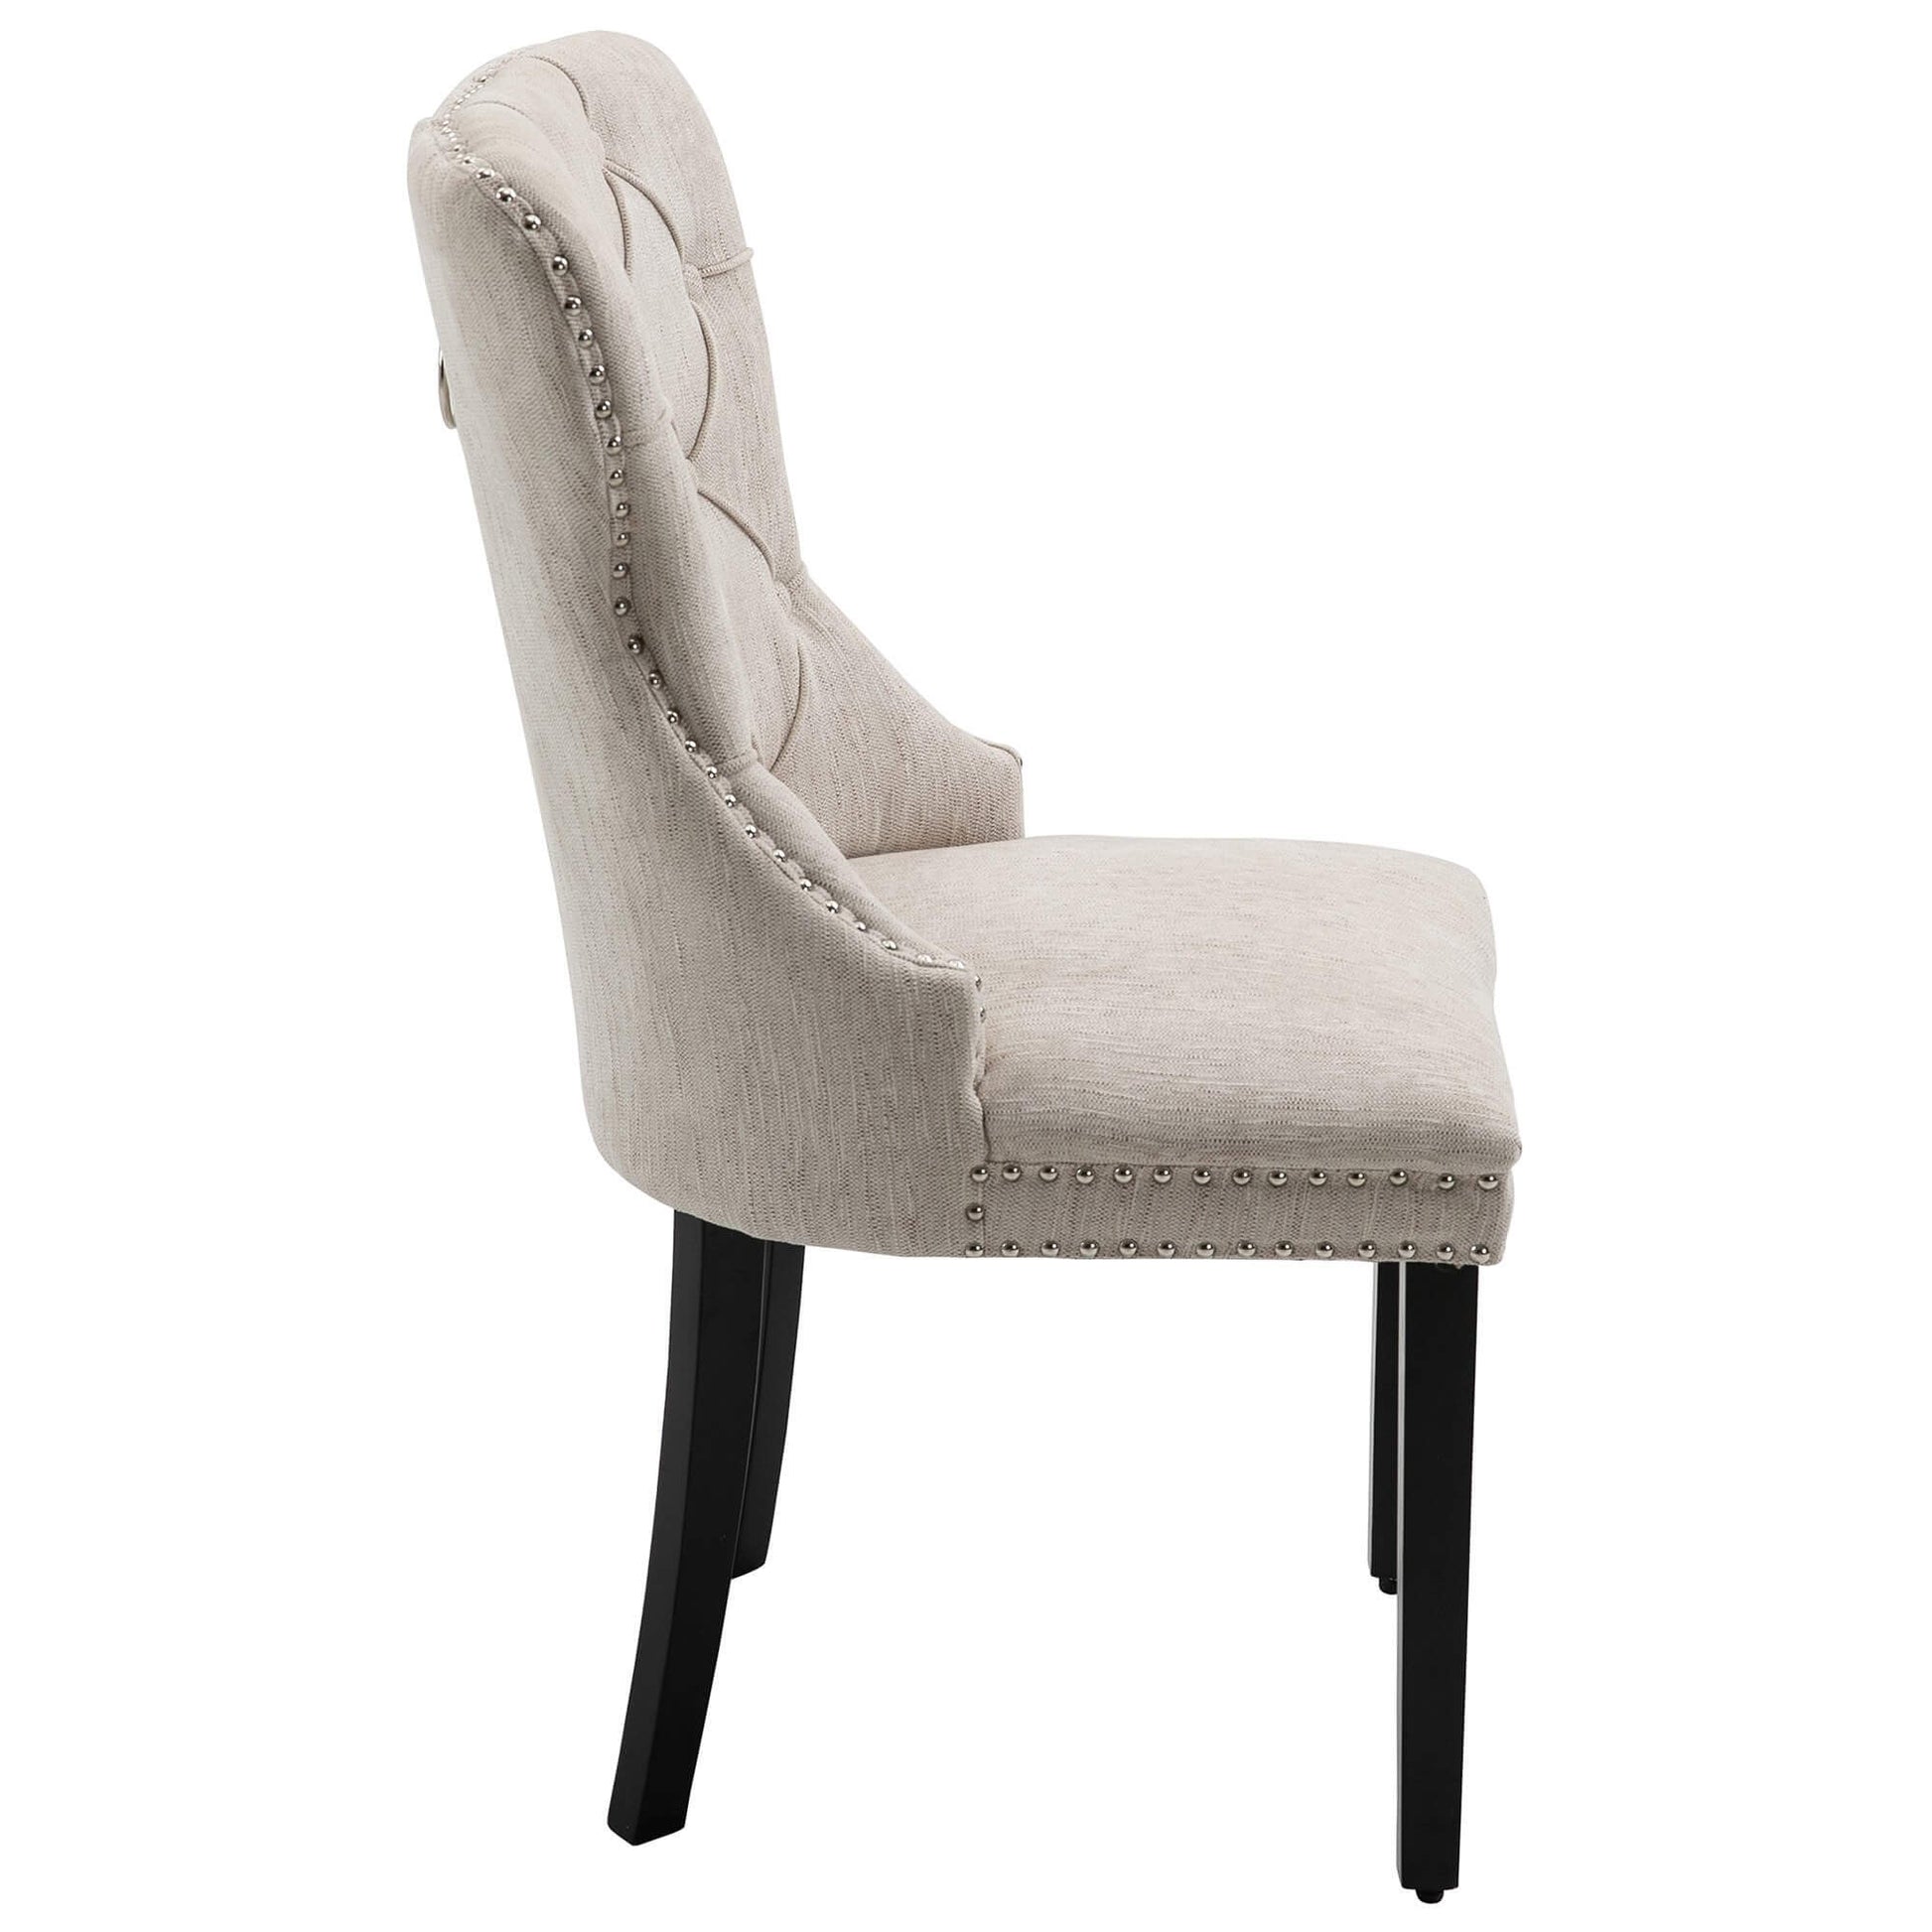 Genoa Version 1 | Fabric French Provincial Wooden Dining Chairs | Set Of 2 | Beige